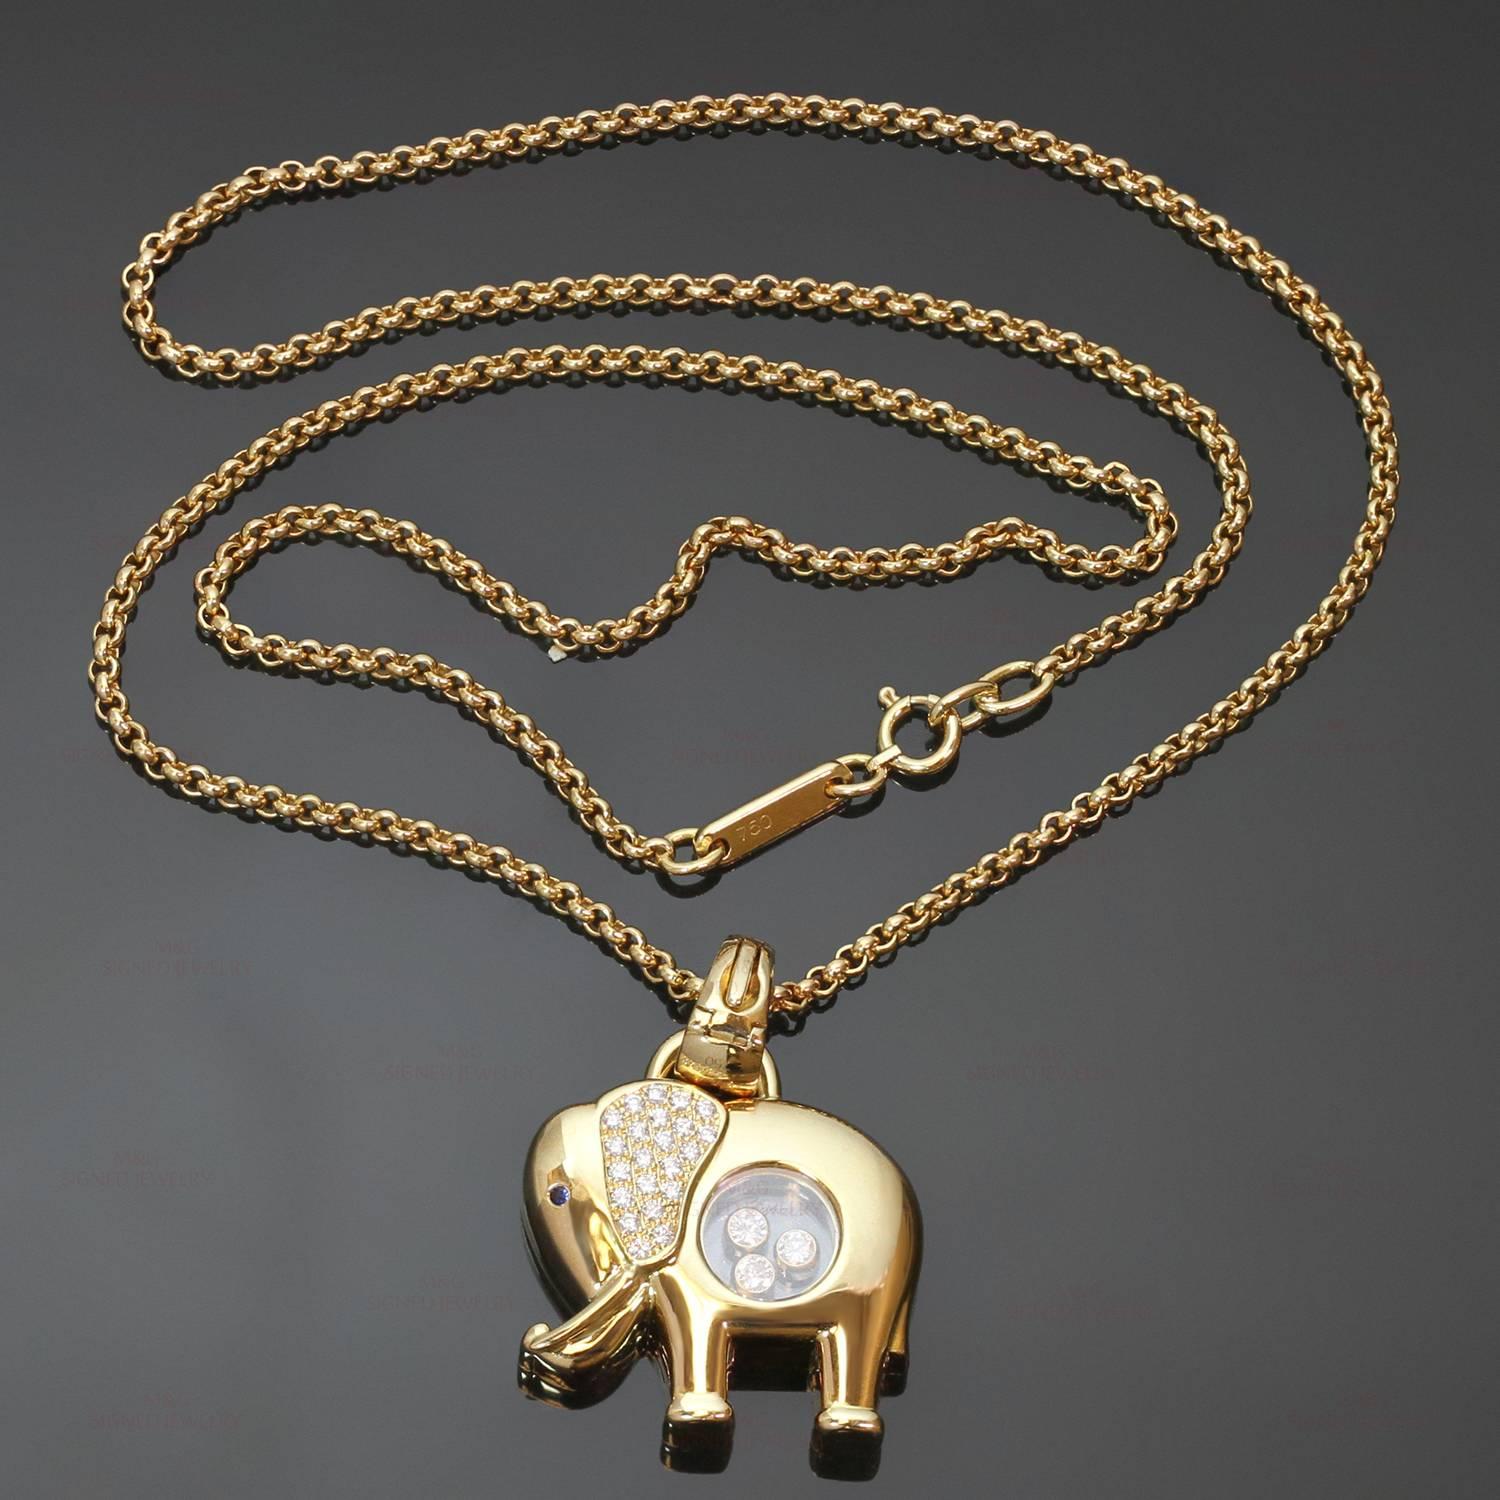 This chic Chopard necklace from the classic Happy Diamond collection features an elephant-shaped pendant enhancer crafted in 18k yellow gold and accented with a blue sapphire eye, a sparkling pave-set diamond ear, and a round glazed interior